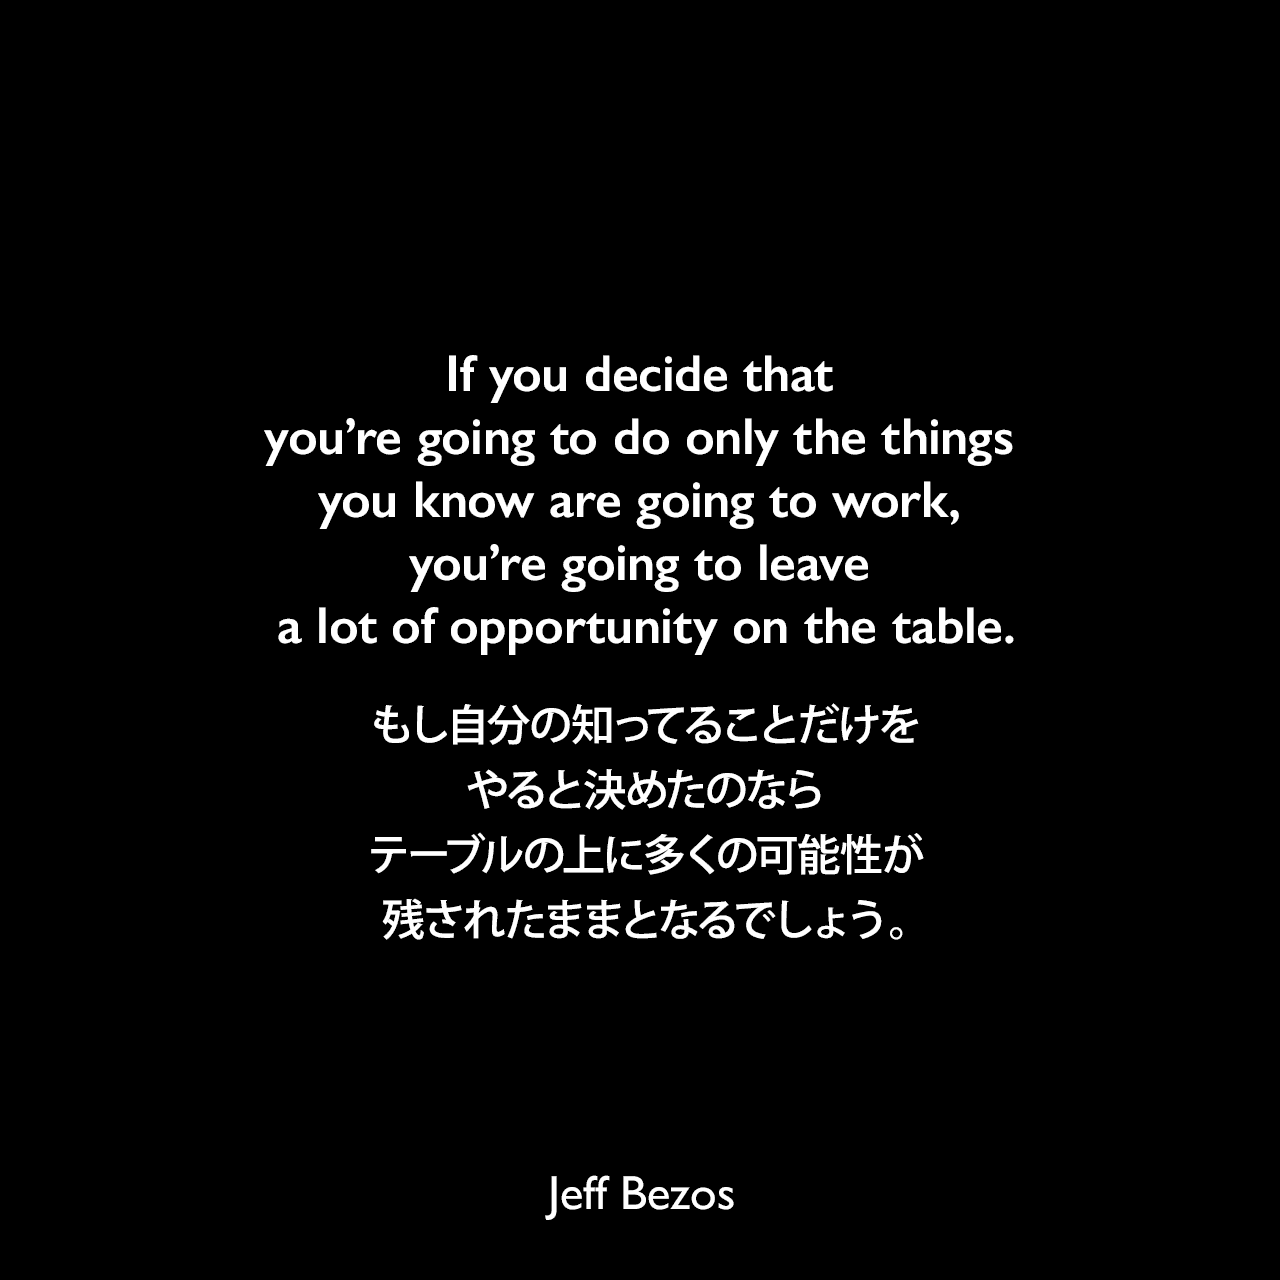 If you decide that you’re going to do only the things you know are going to work, you’re going to leave a lot of opportunity on the table.もし自分の知ってることだけをやると決めたのなら、テーブルの上に多くの可能性が残されたままとなるでしょう。Jeff Bezos